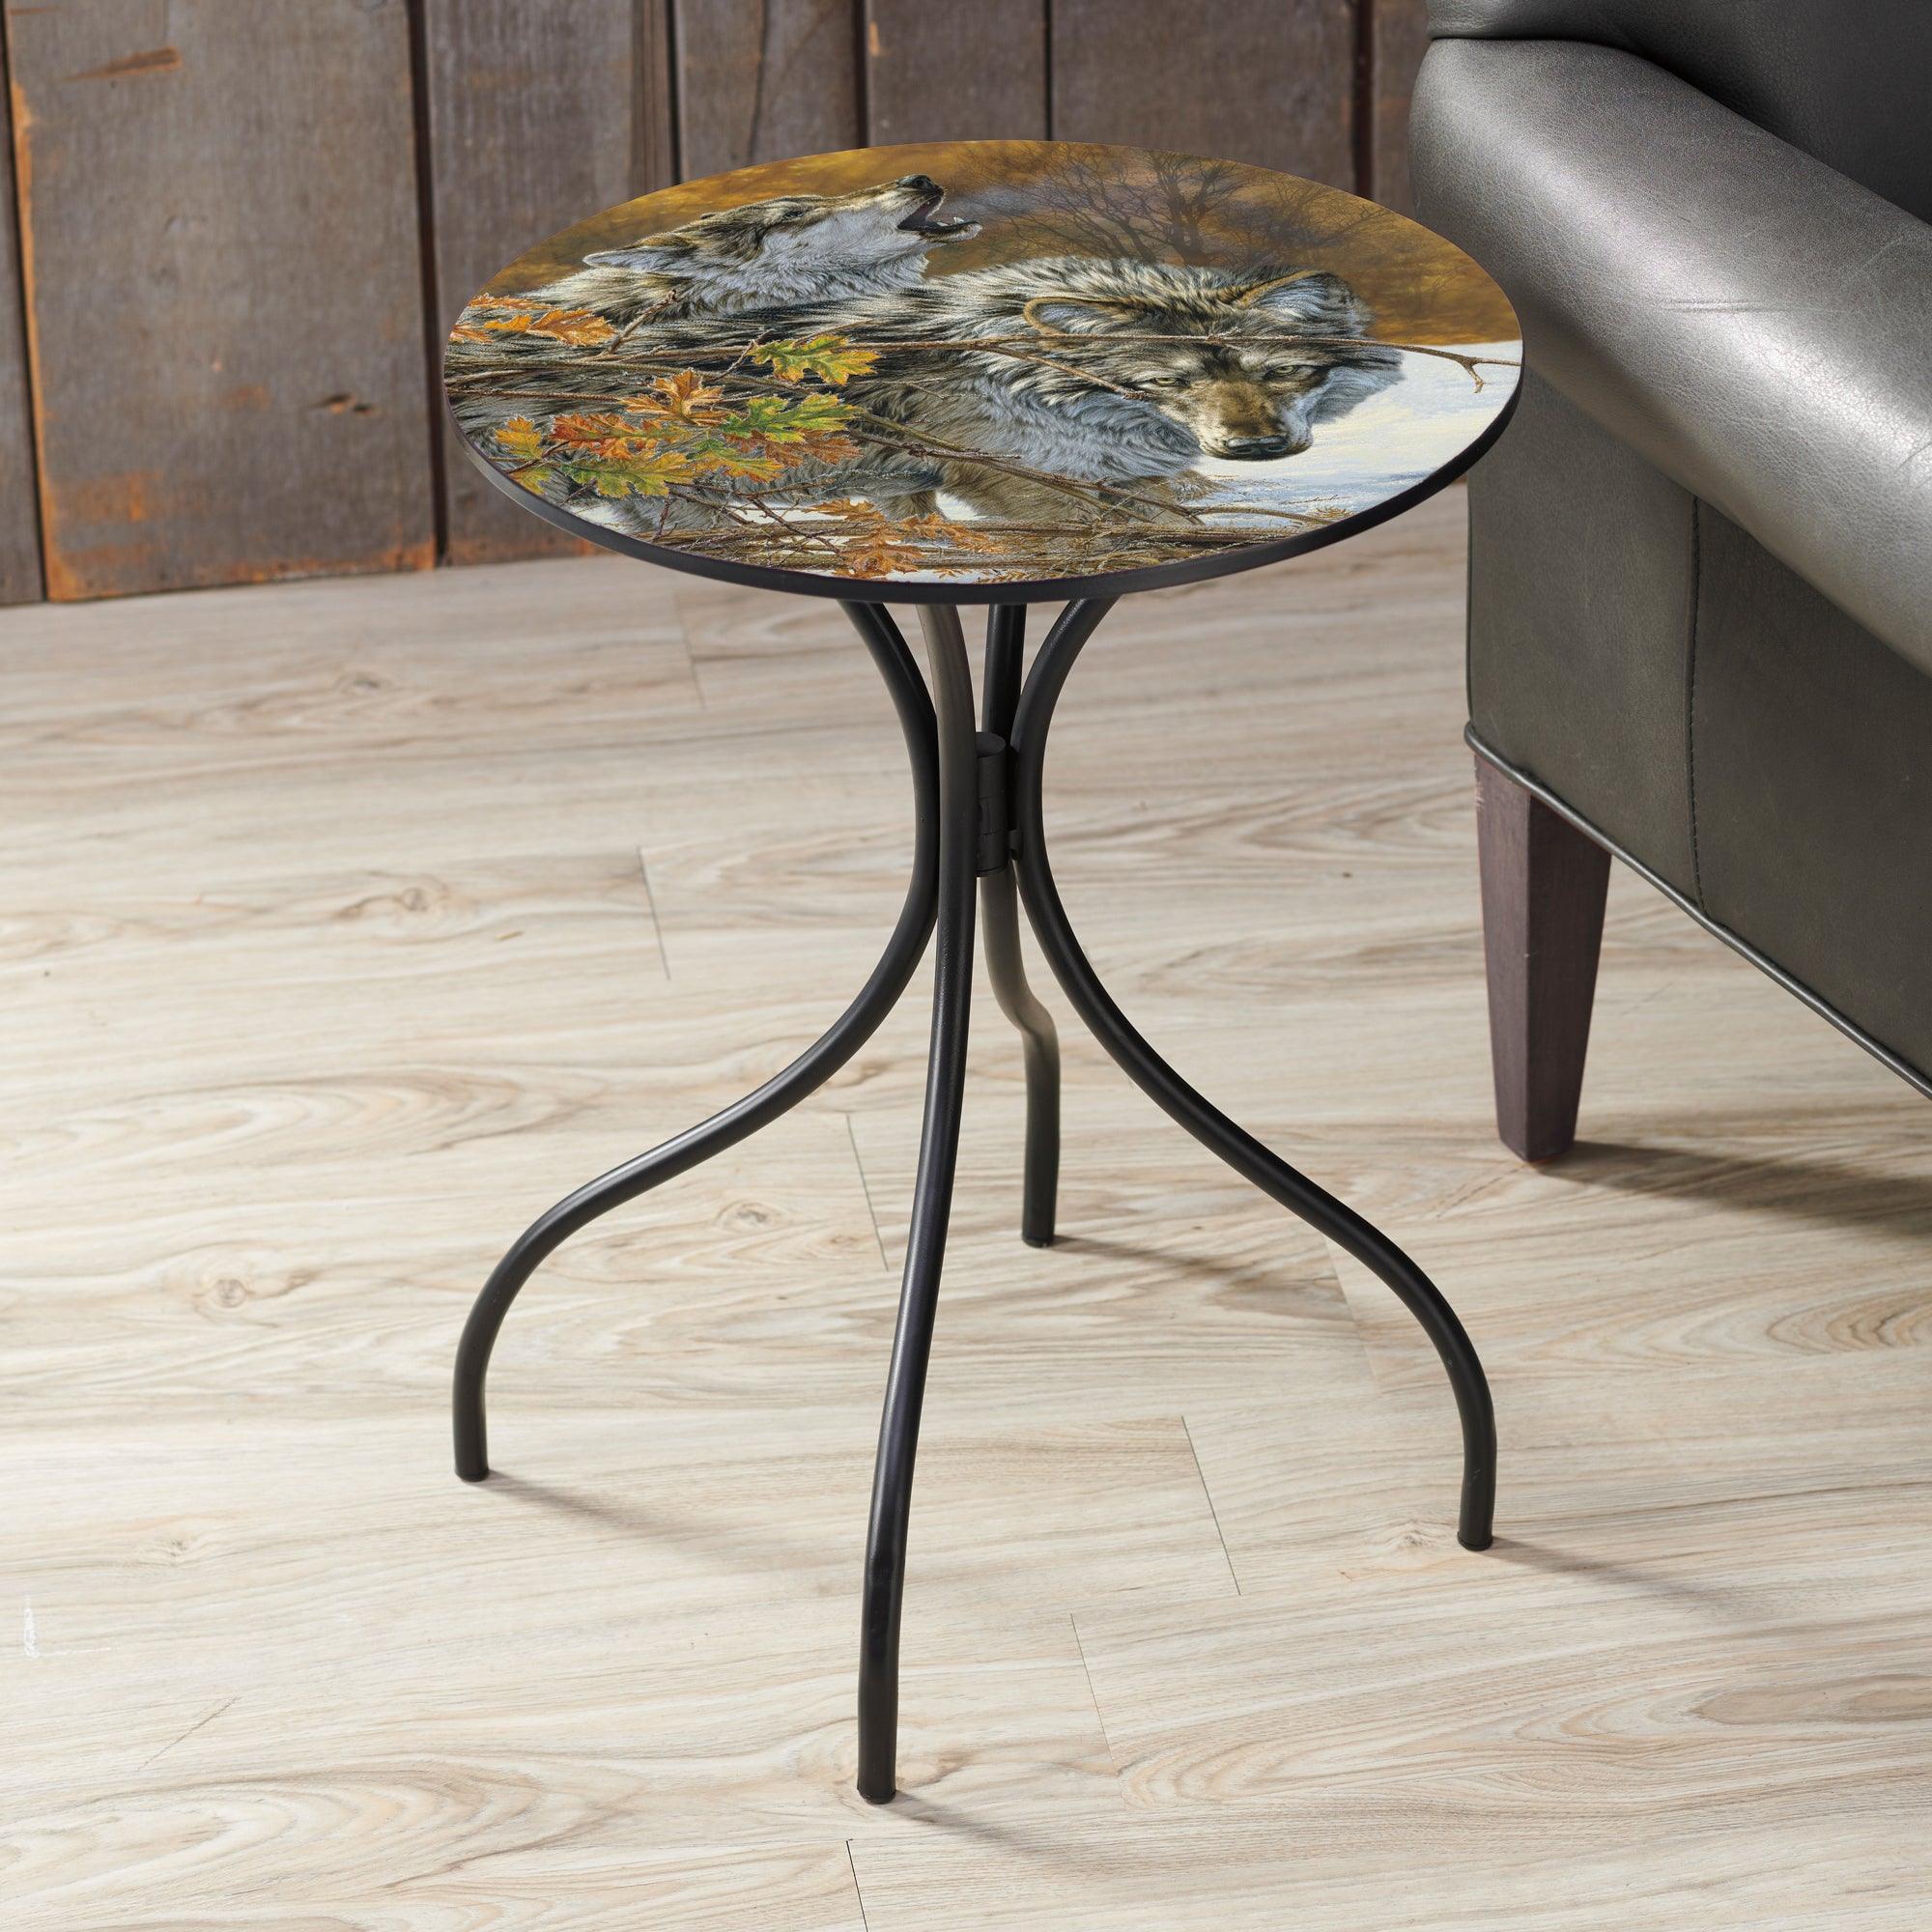 Body Language - Wolves Metal Side Table - Wild Wings